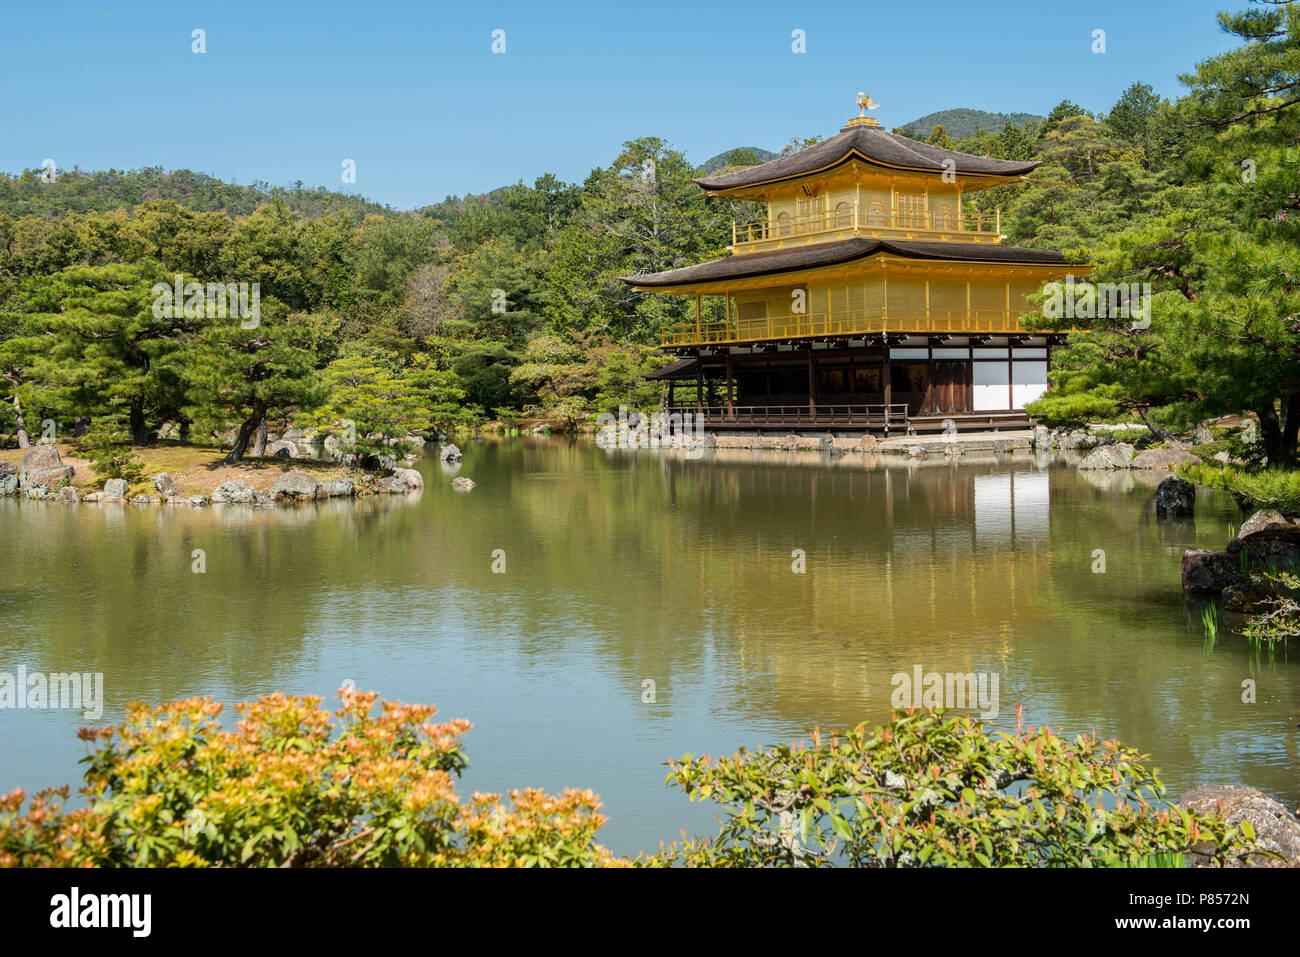 Kinkaku-ji or the Temple of the Golden Pavilion in Kyoto, Japan. This is a Zen Buddhist temple and one of the most famous landmarks in Kyoto. Stock Photo